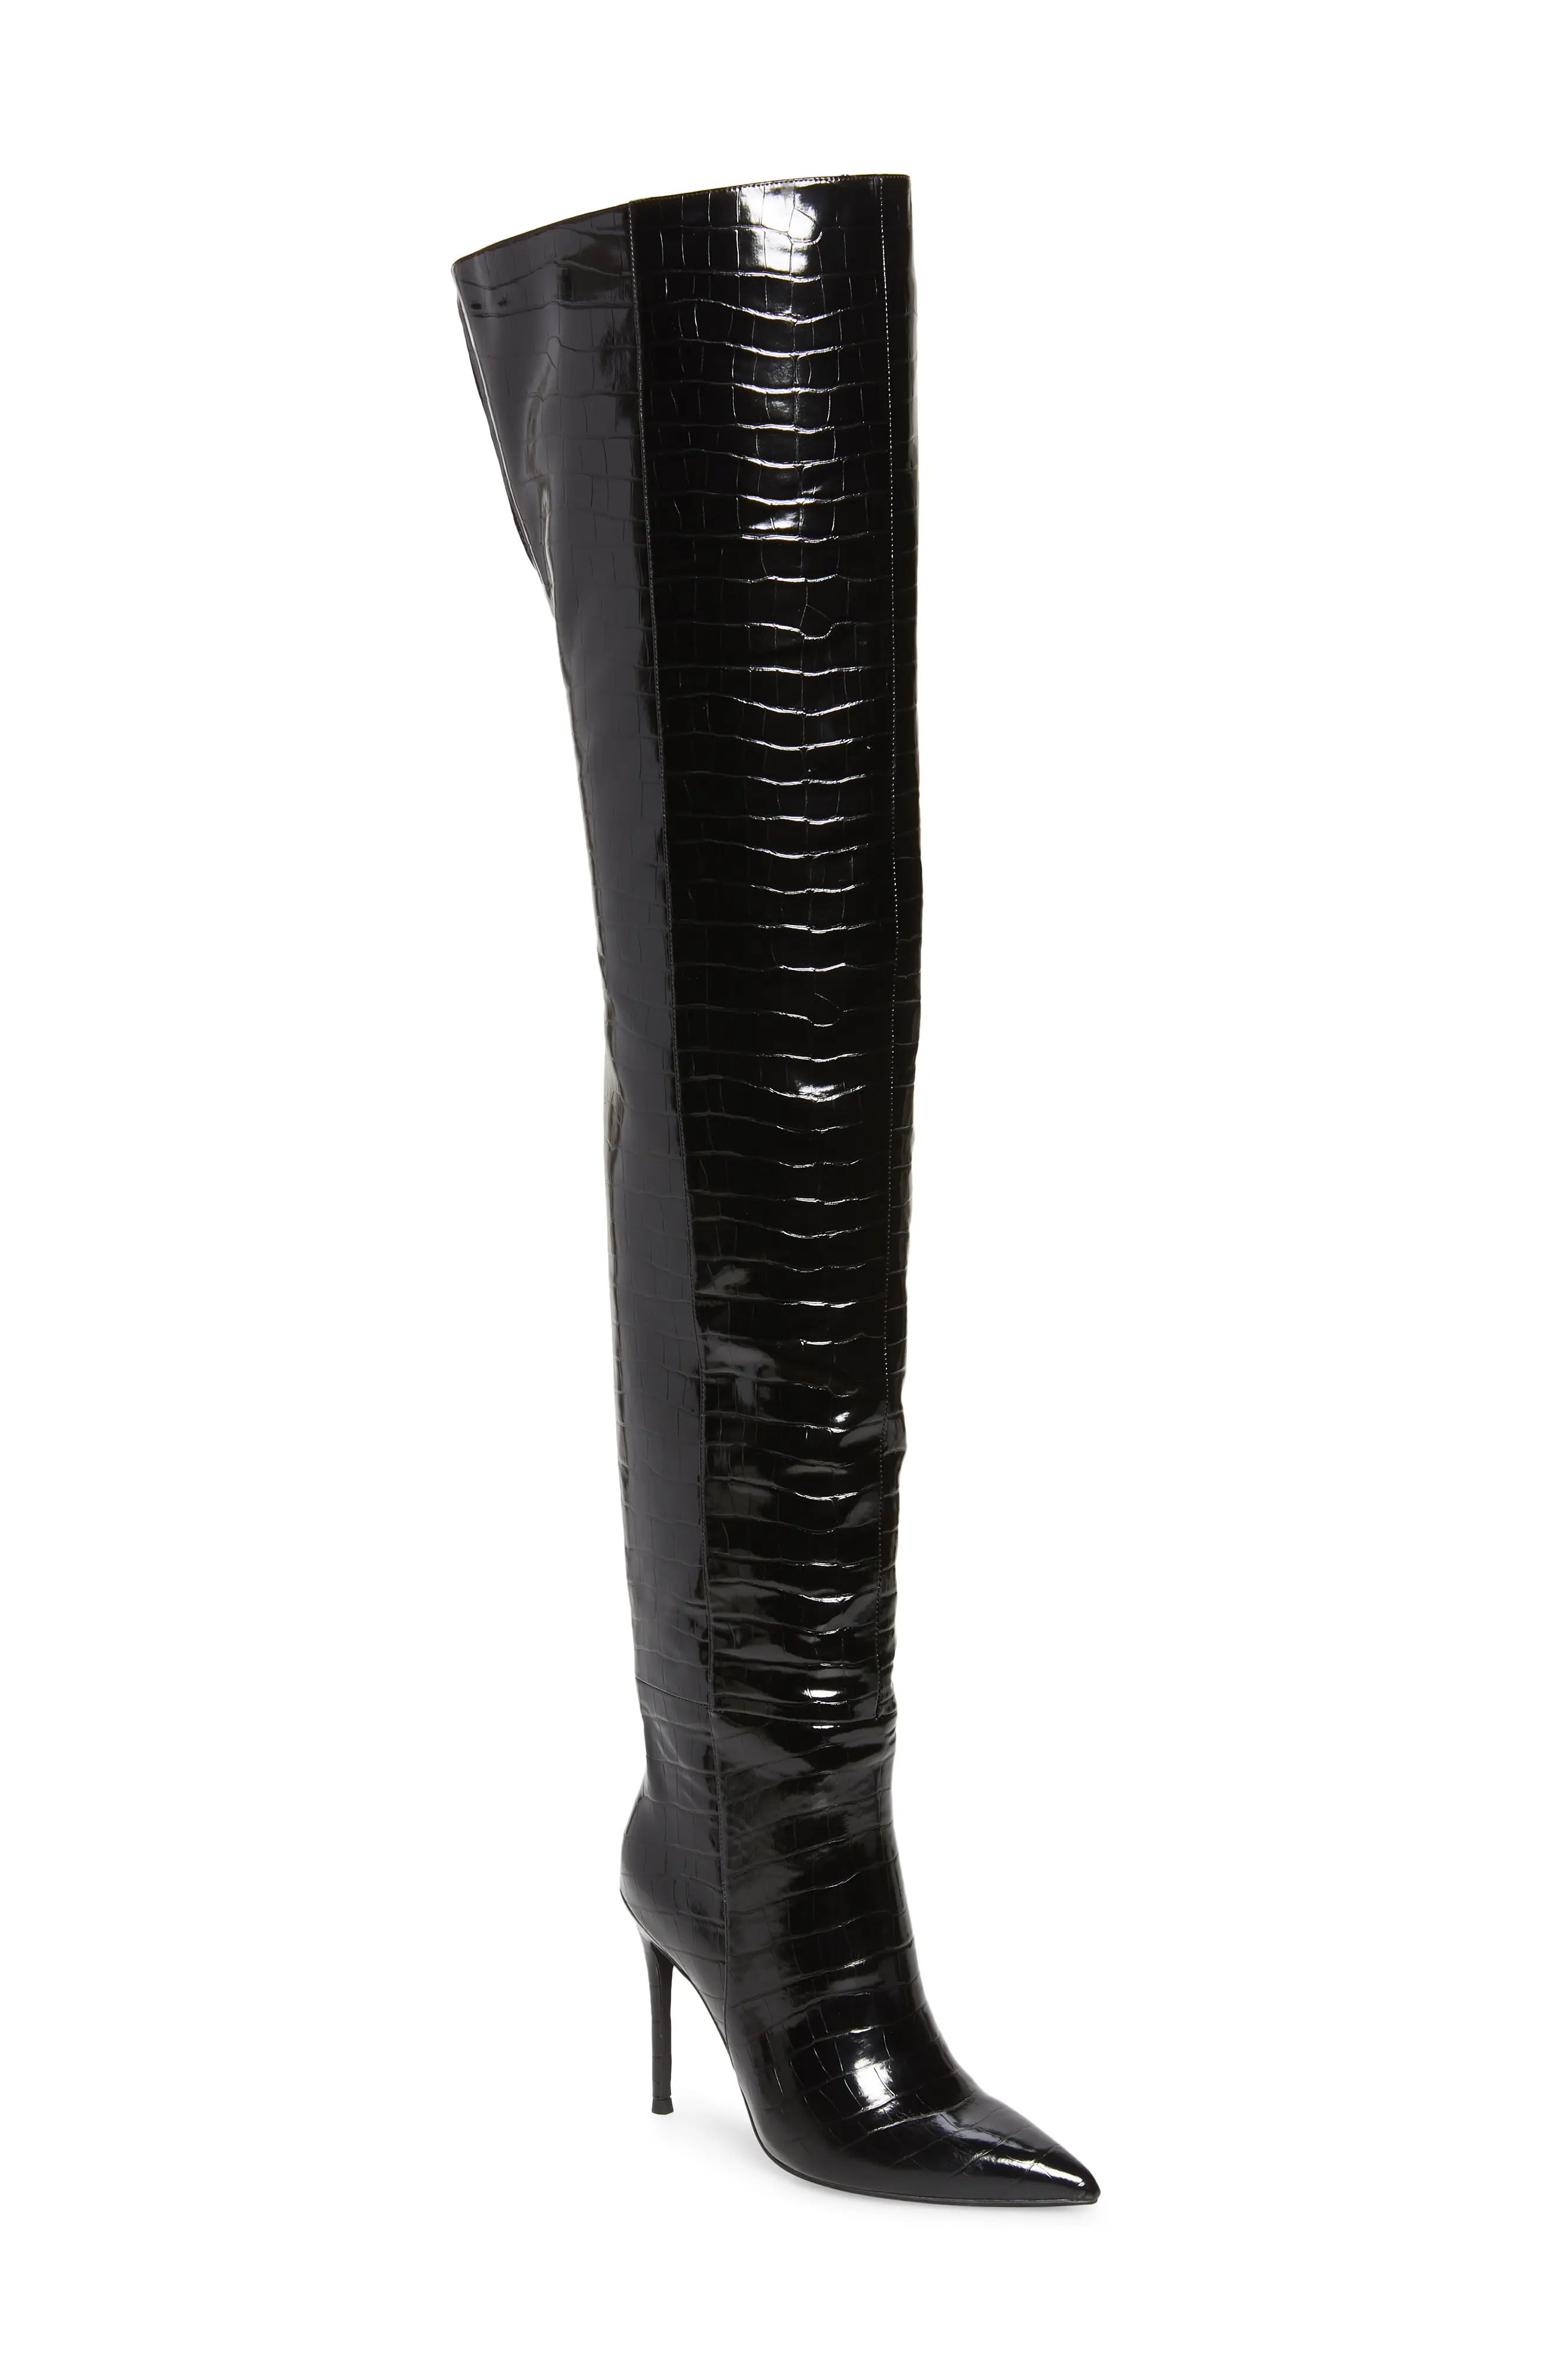 Women's Jeffrey Campbell Arsenic Thigh High Boot, Size 8.5 M - Black | Nordstrom